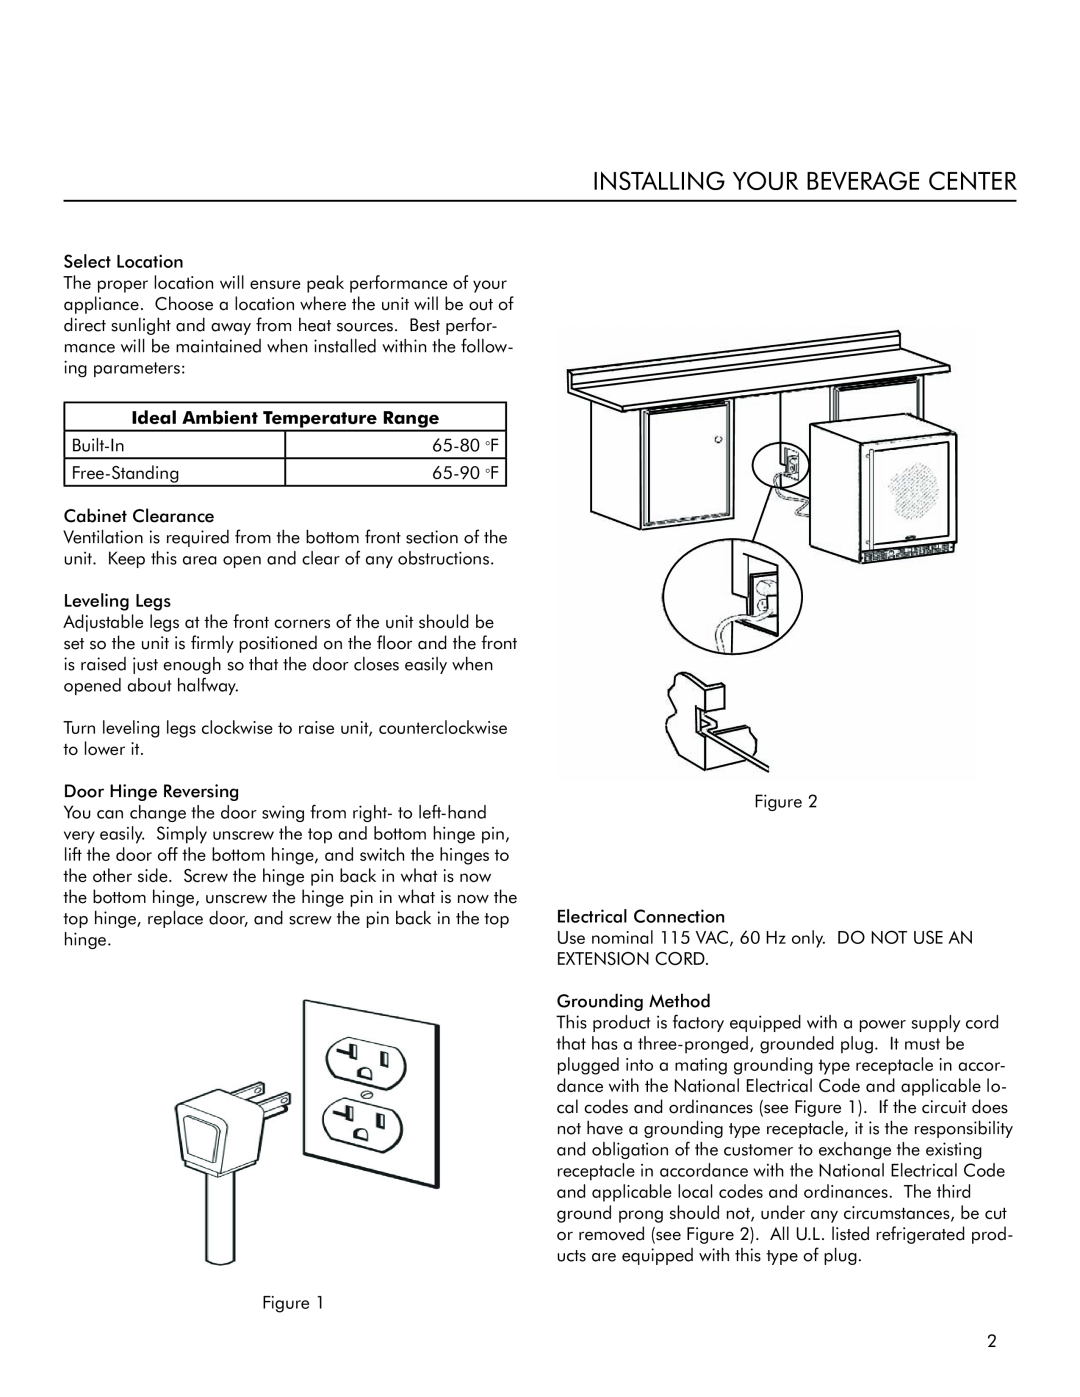 Marvel Industries 3SBARE manual Installing Your Beverage Center, Ideal Ambient Temperature Range 